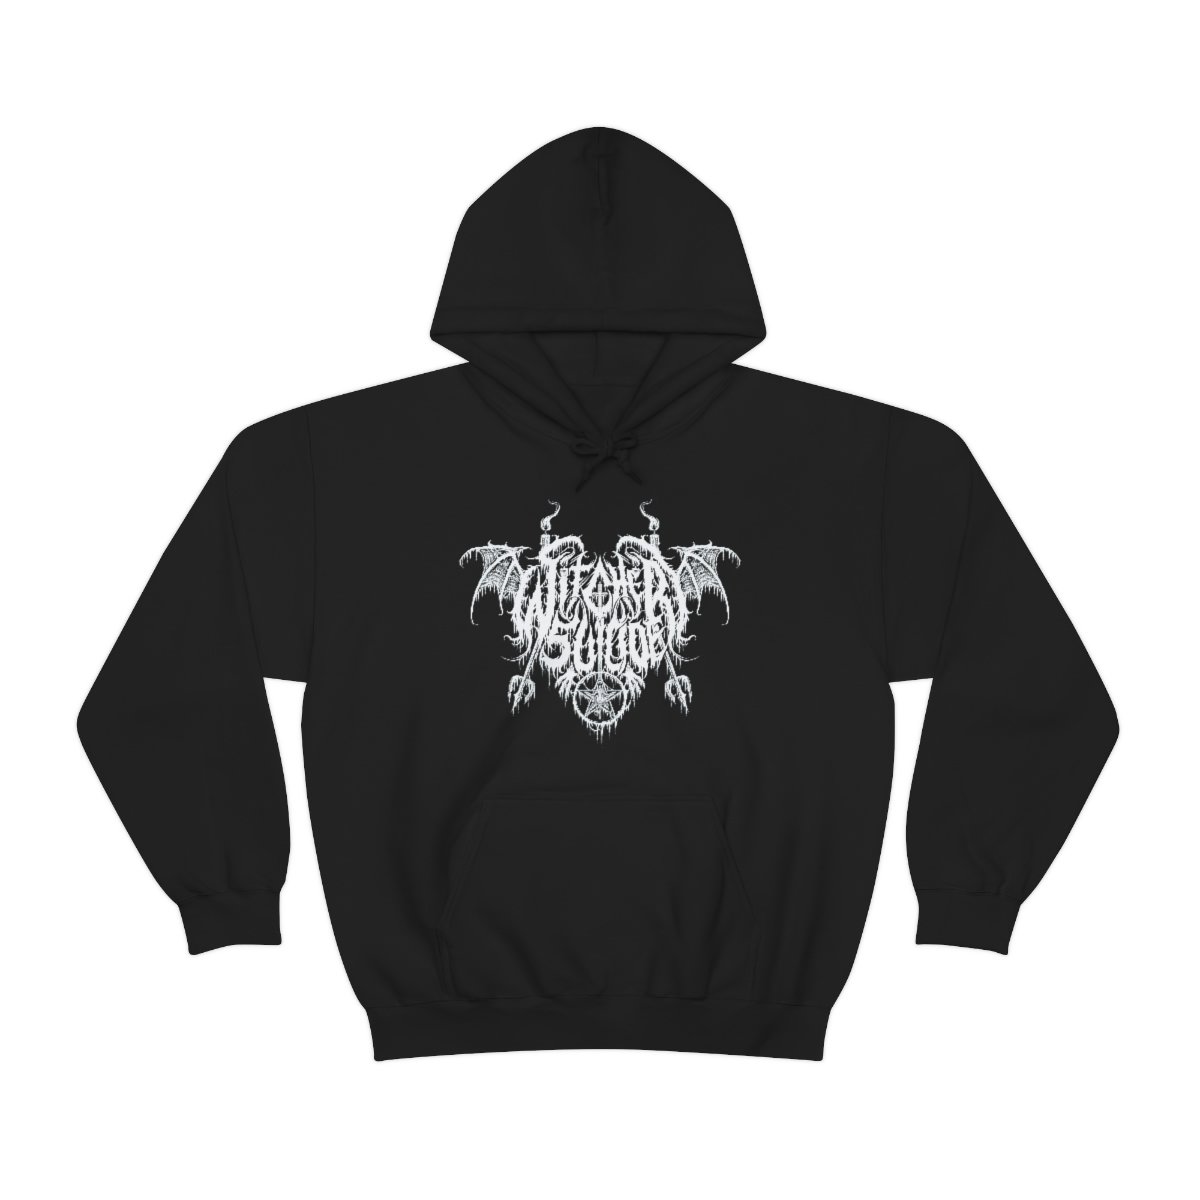 Witchery Suicide Emblem Pullover Hooded Sweatshirt